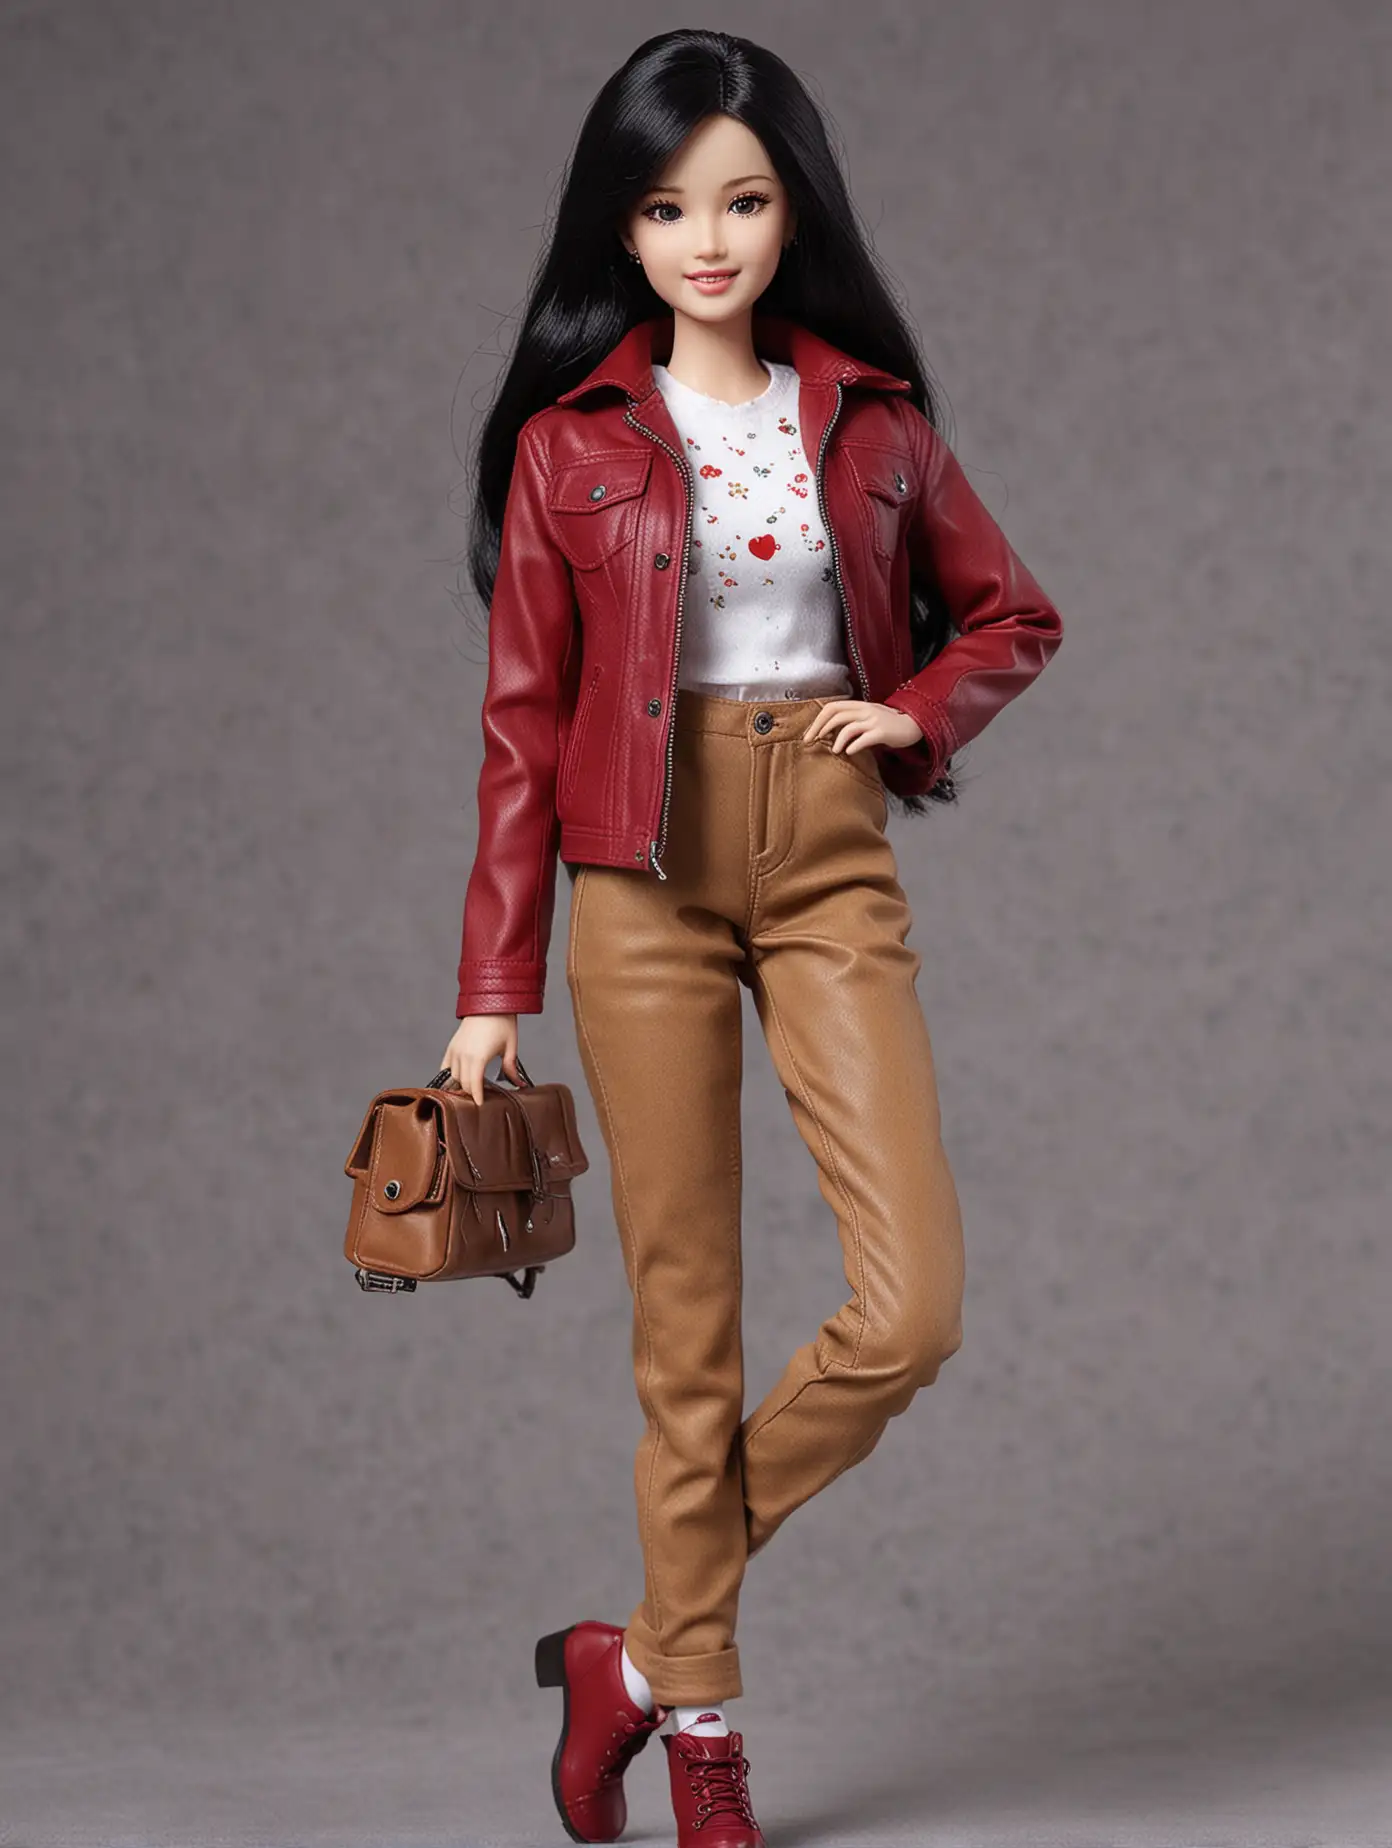 Beautiful teenage Kim Hye-yoon Barbie doll. height 70CM. Black hair. wearing a Maroon Leather Jacket. trousers. Red Shoes. Smile Pose.